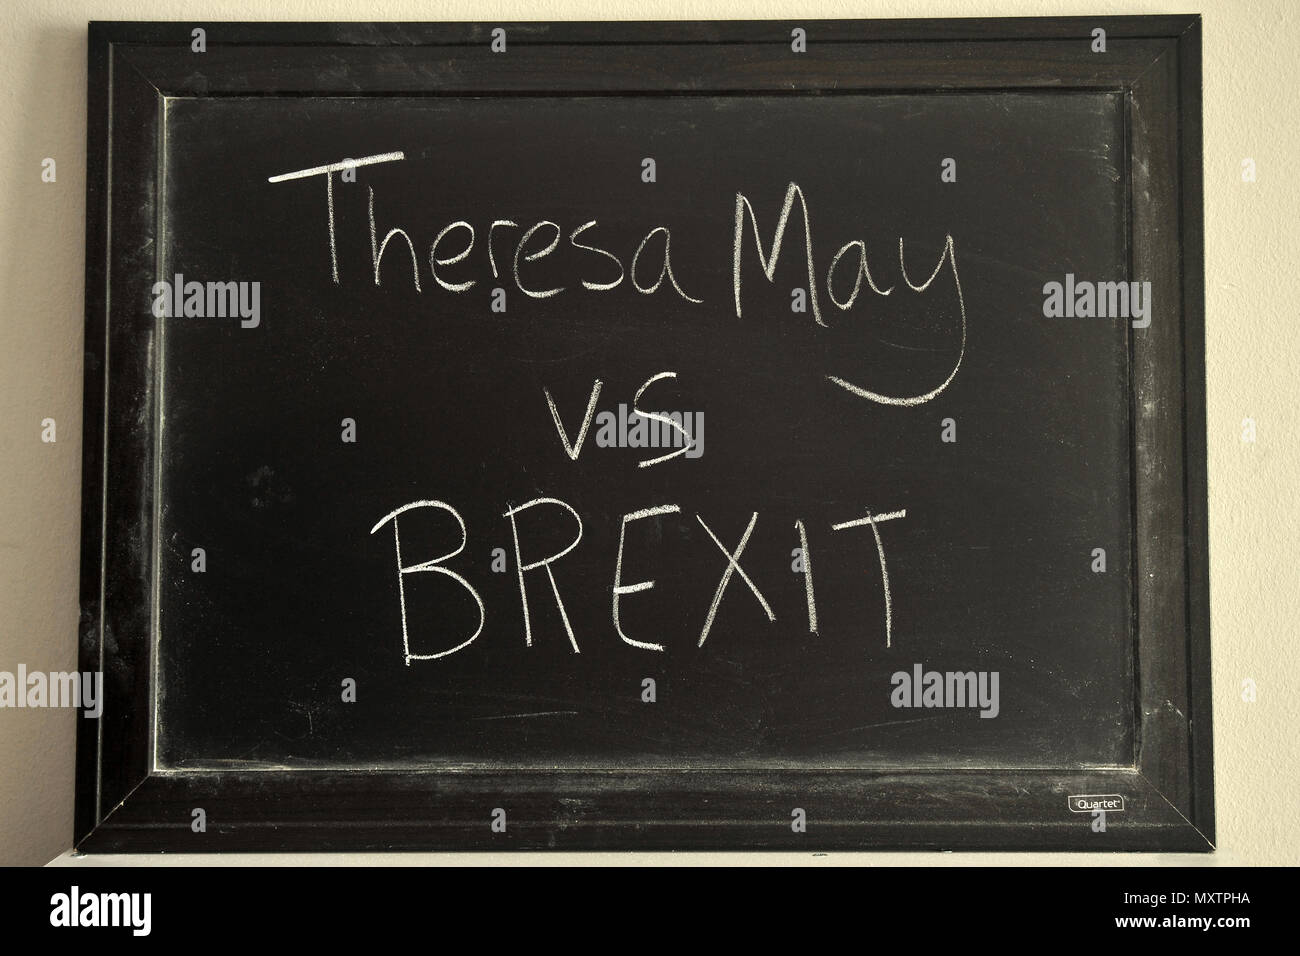 Theresa May vs BREXIT written in white chalk on a blackboard. Stock Photo